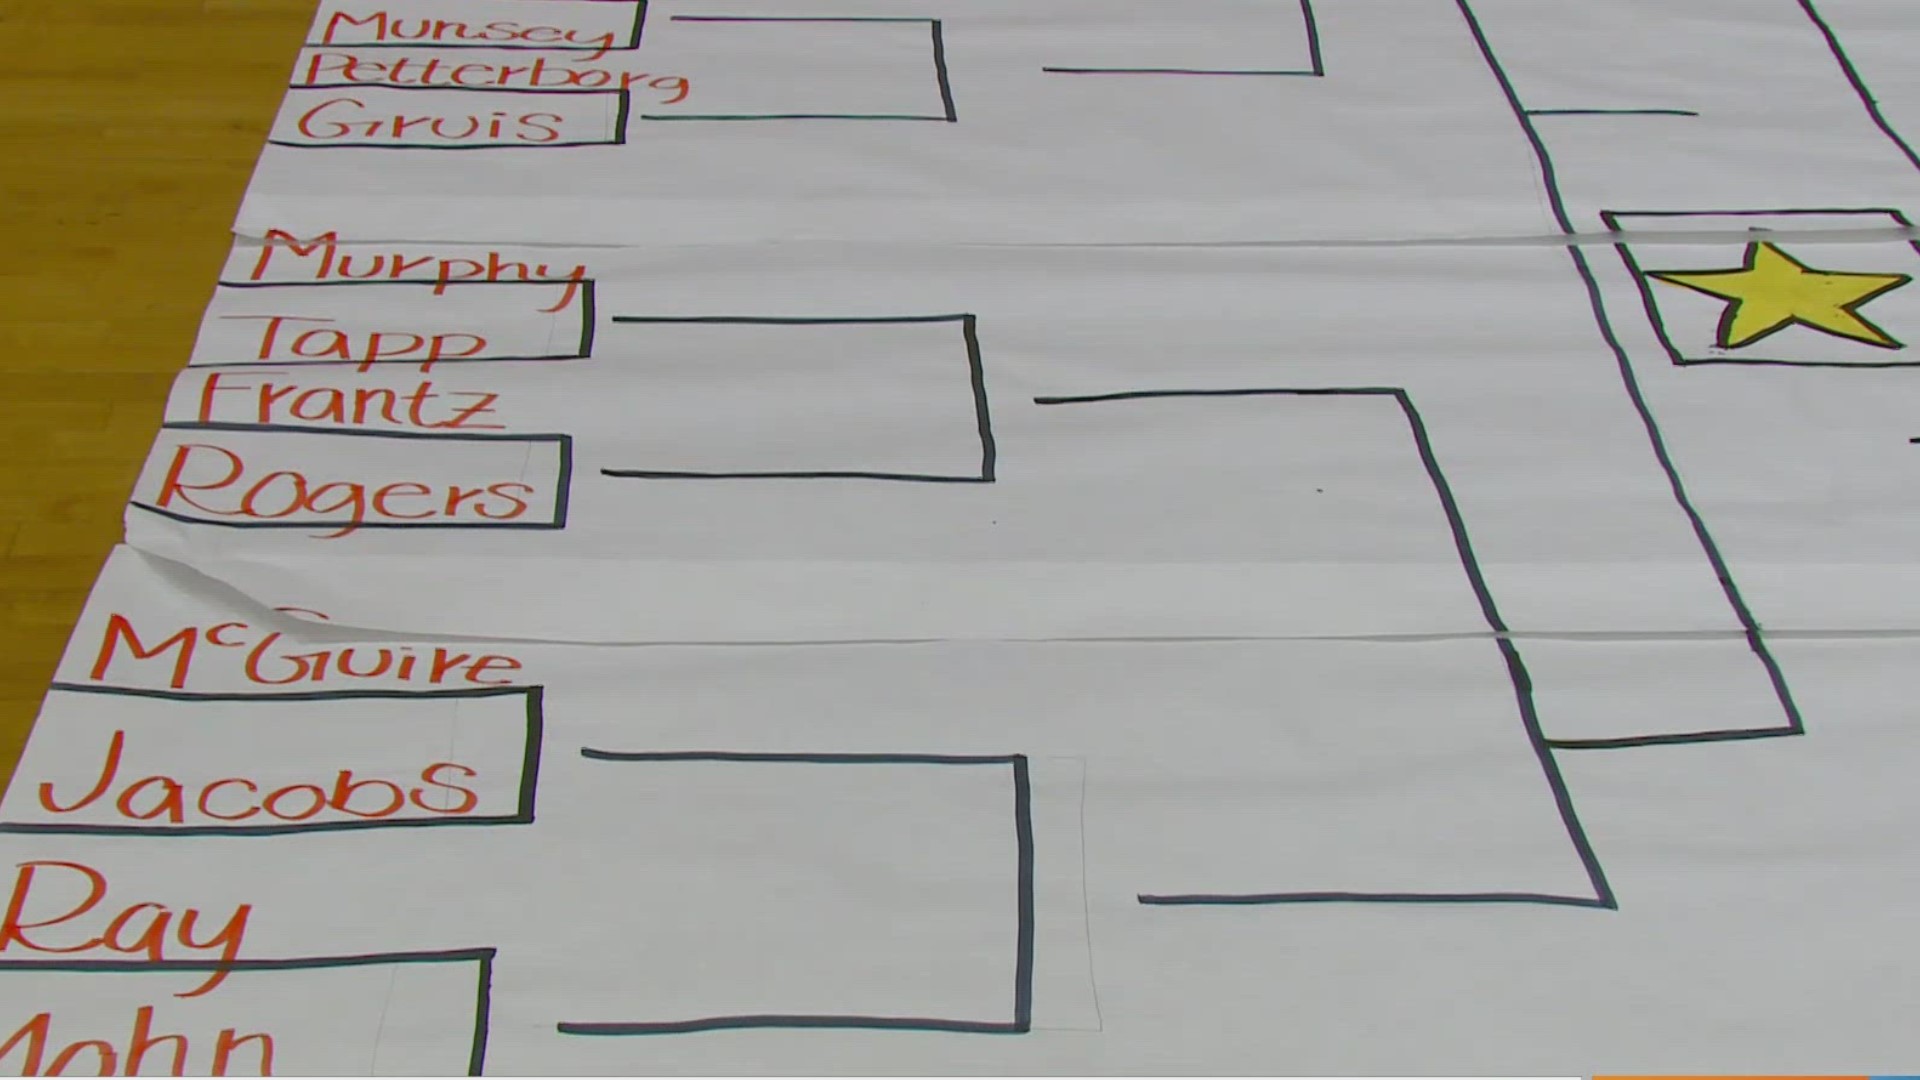 Teachers in Spokane have set up unique brackets to compete in everything from attendance to jokes.